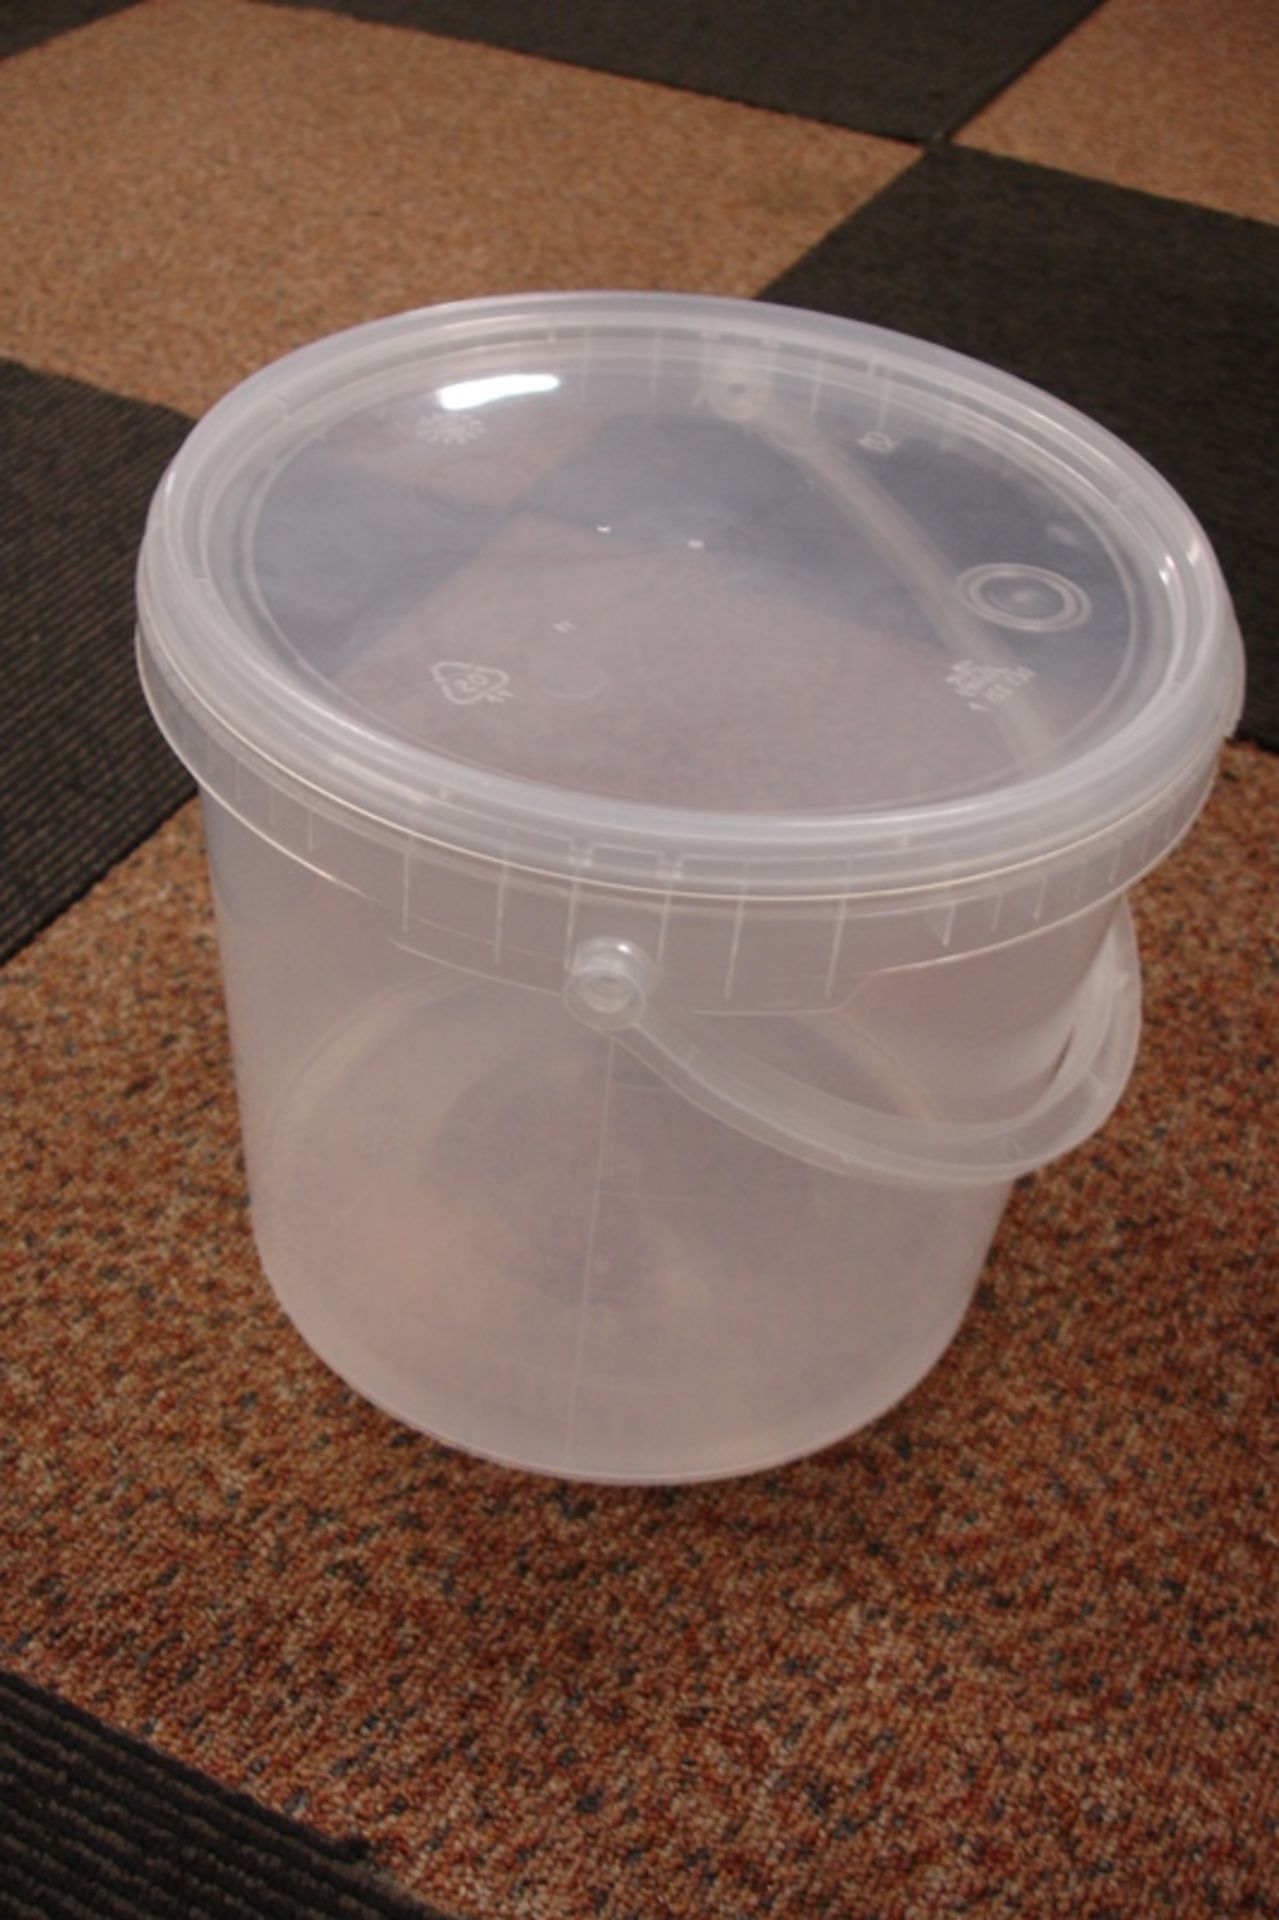 Food Grade 5 litre Clear Plastic Tubs/Buckets with handles and Tamper Evident Lids. - Image 4 of 4